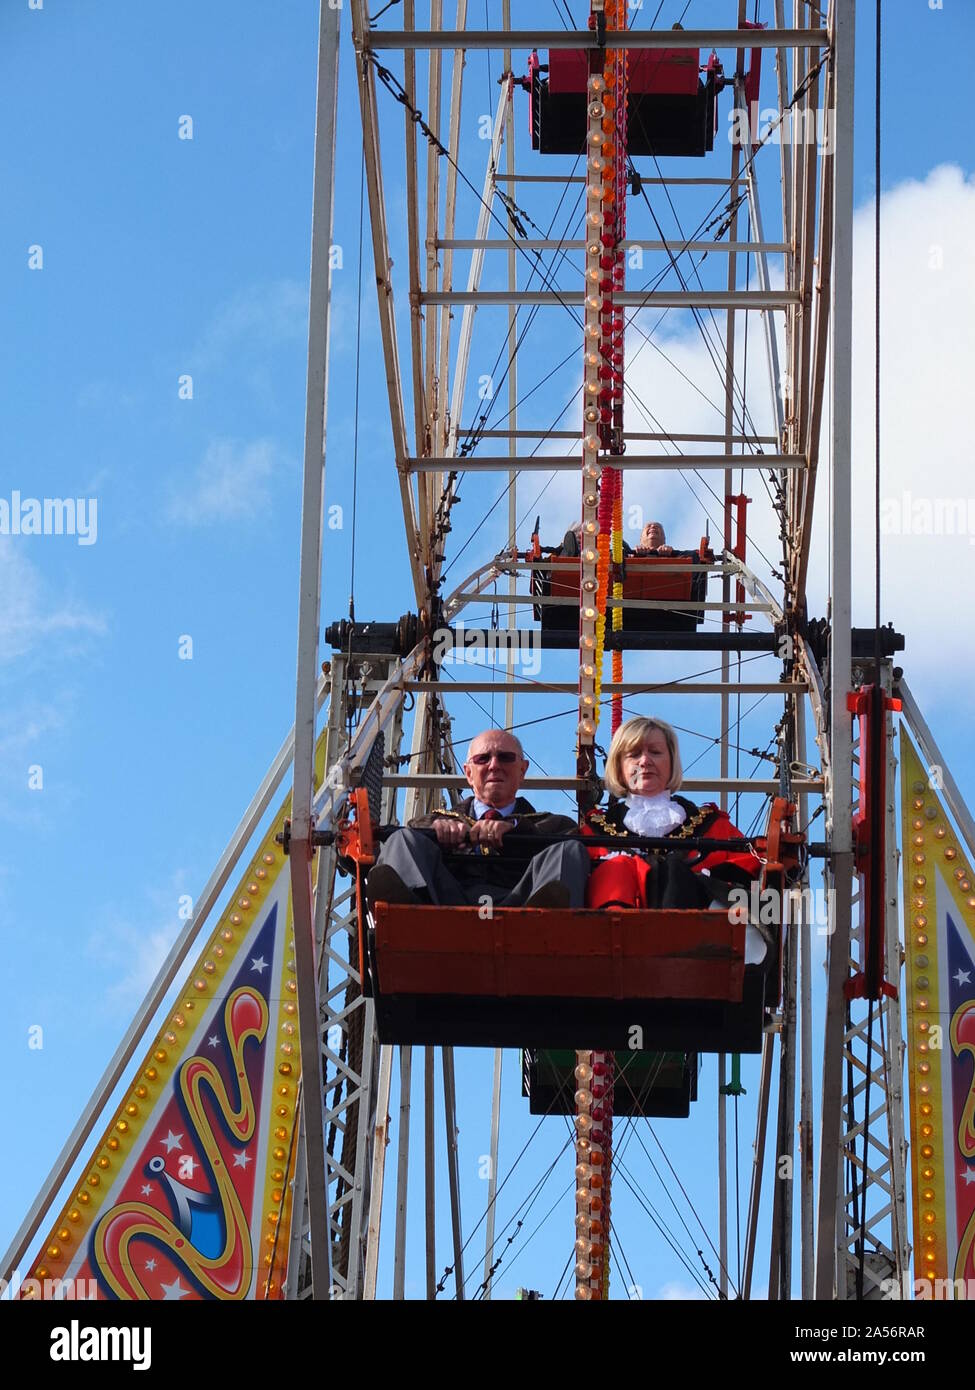 Mayor of Ilkeston Sue Beardsley rides the big wheel at Ilkeston Charter Fair in Derbyshire which received its charter in 1252. Stock Photo